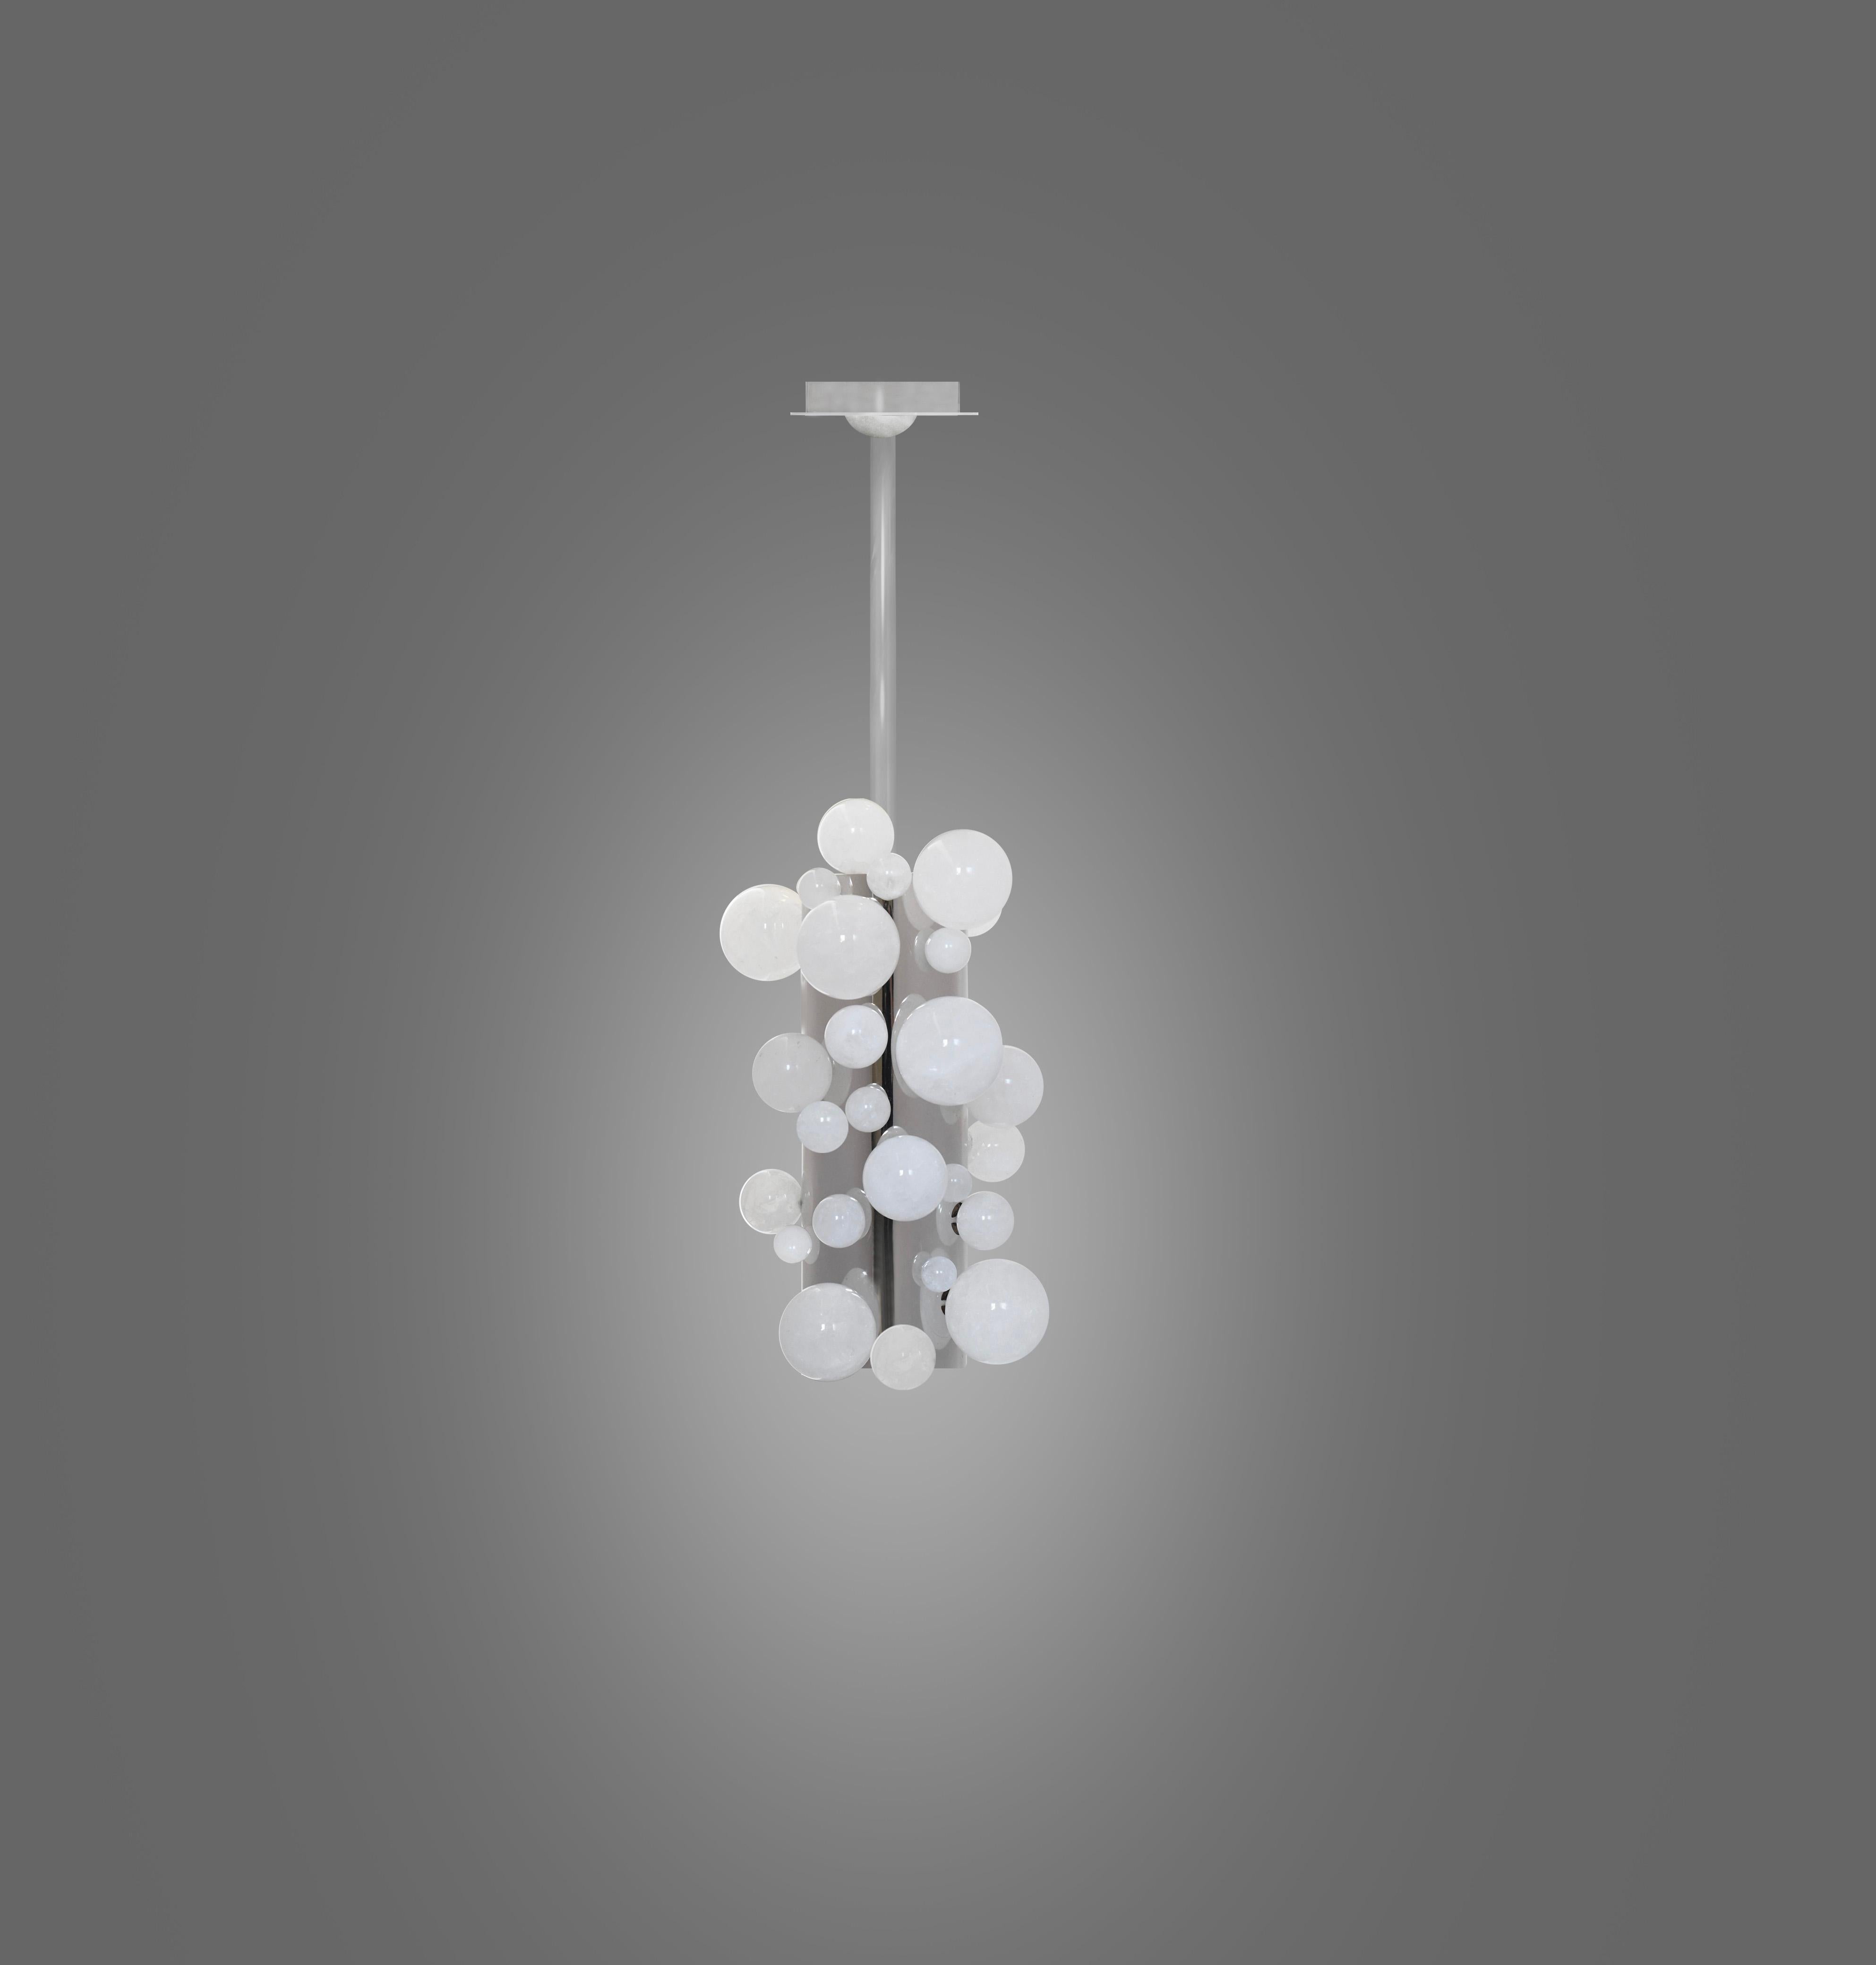 Rock Crystal Pendant Light by Phoenix In Excellent Condition For Sale In New York, NY